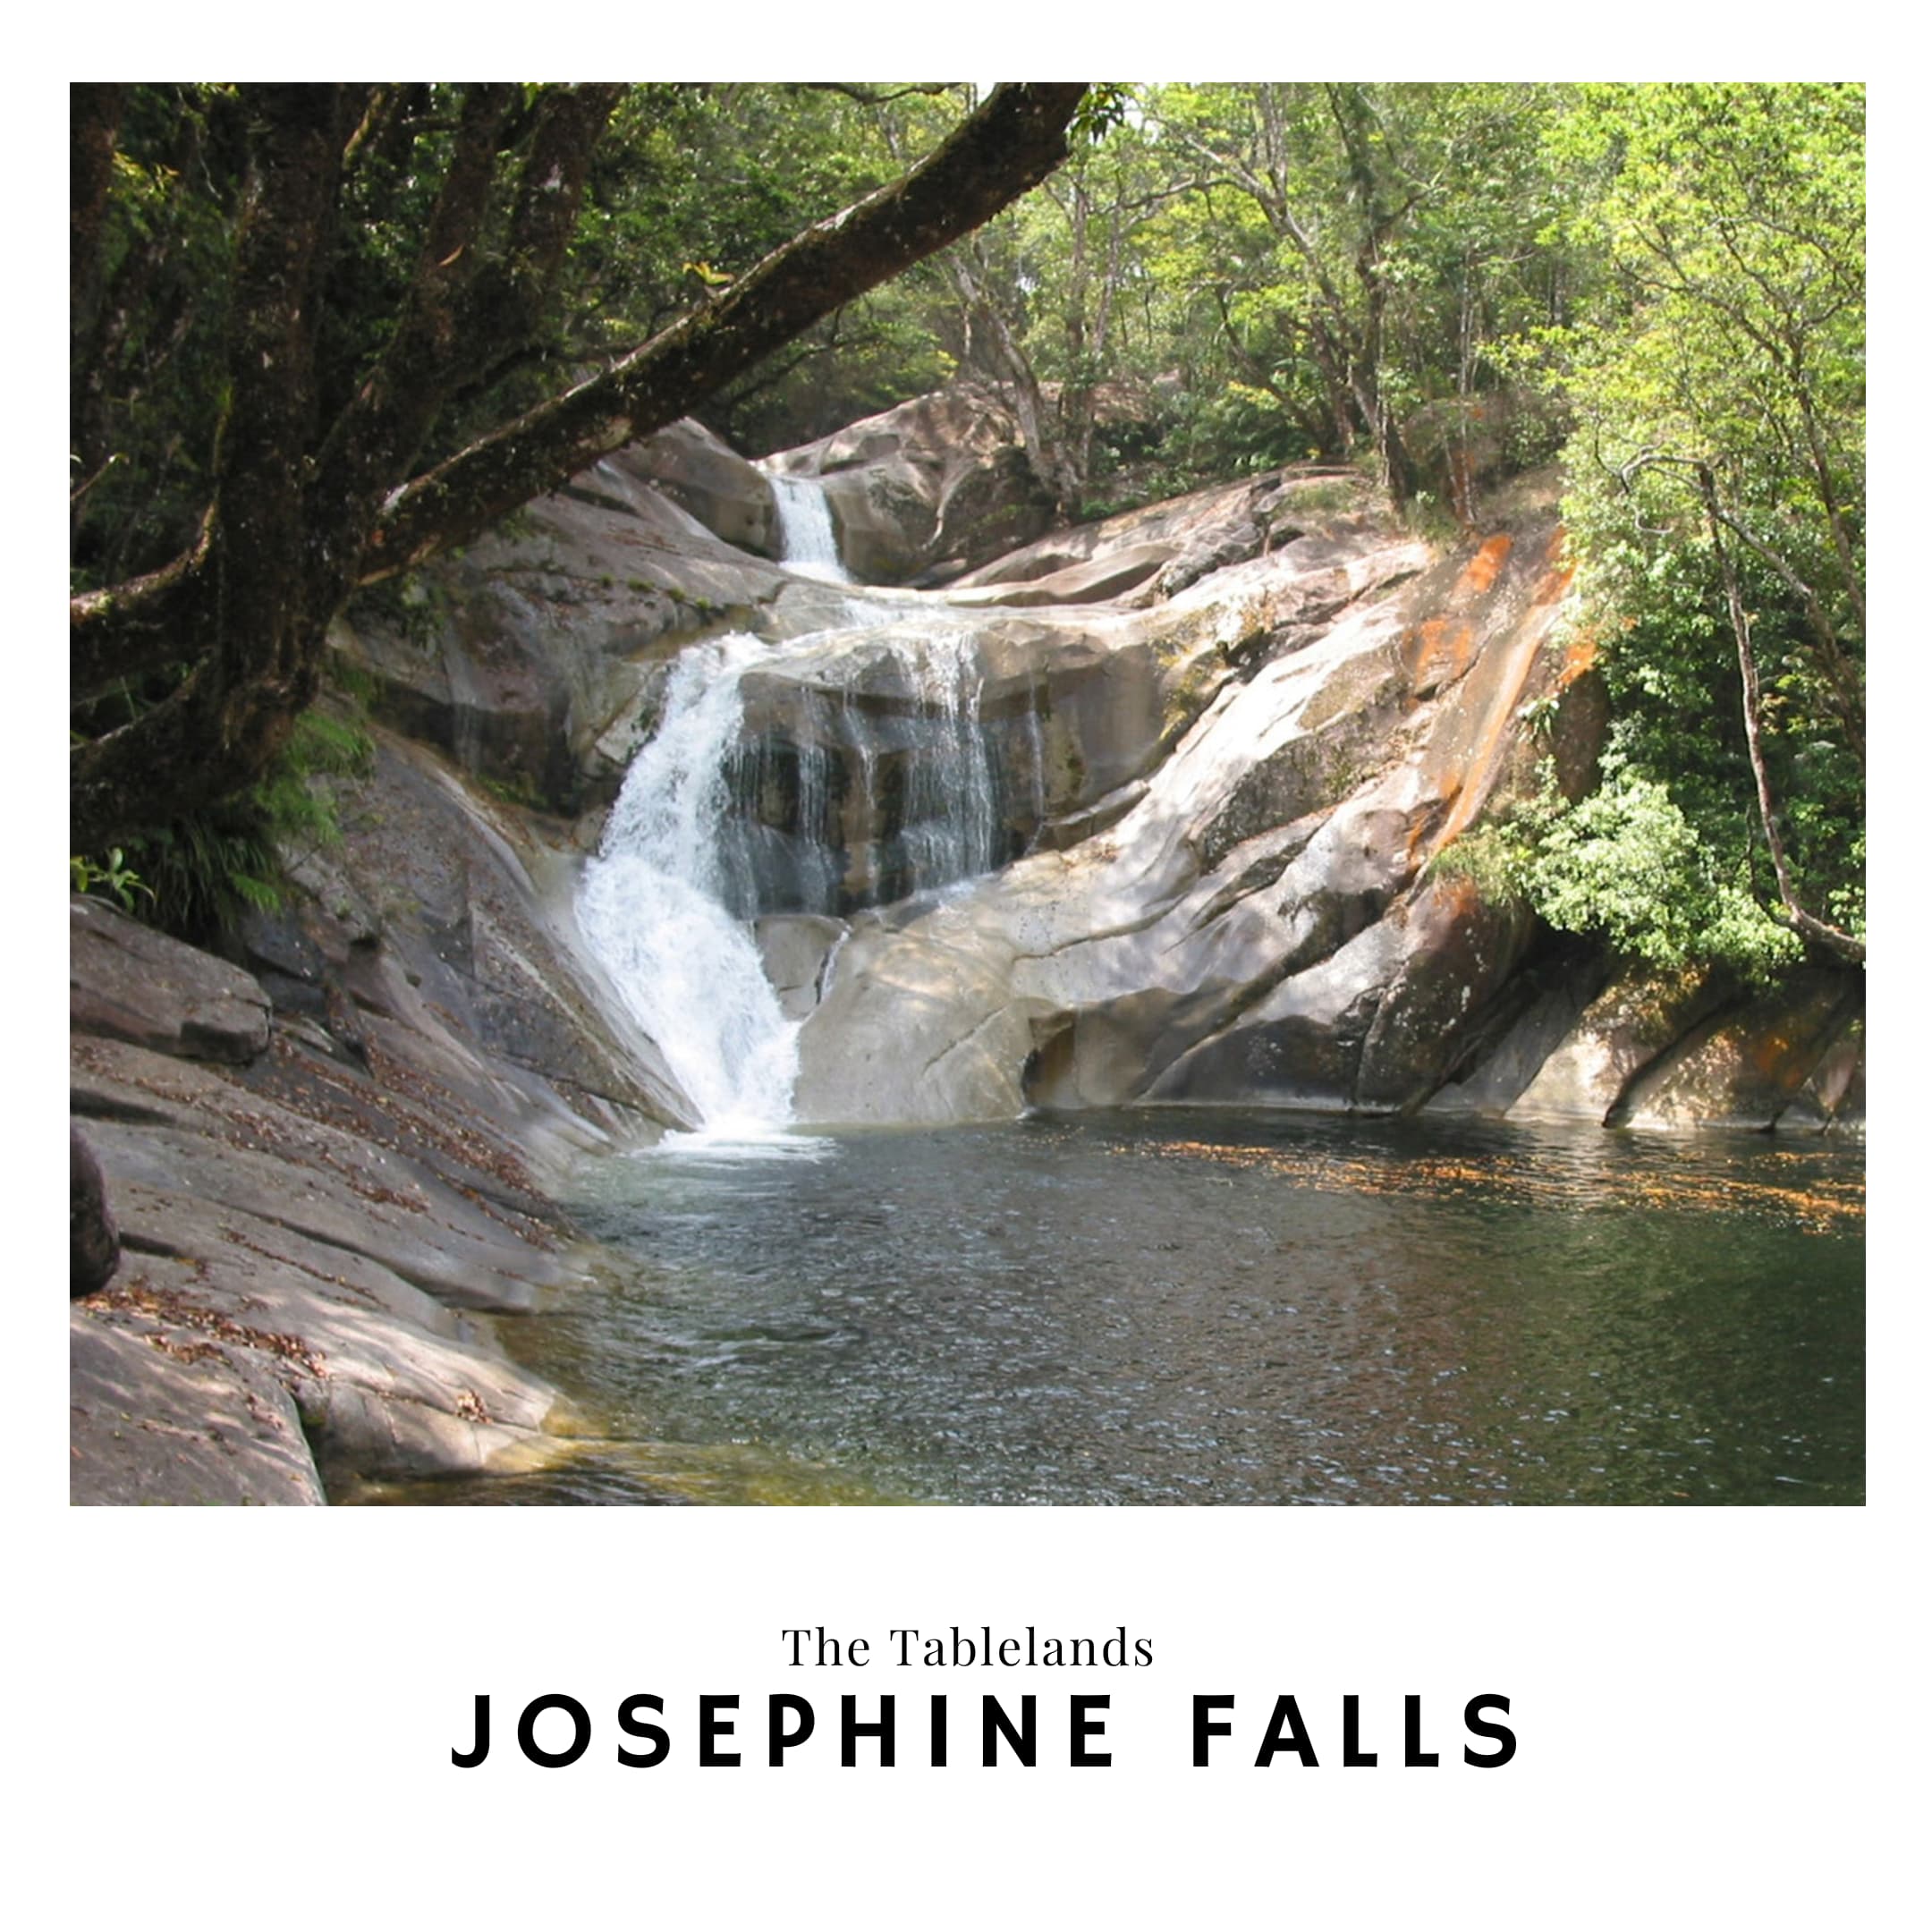 Link to the Josephine Falls Travel Guide in the tablelands australia